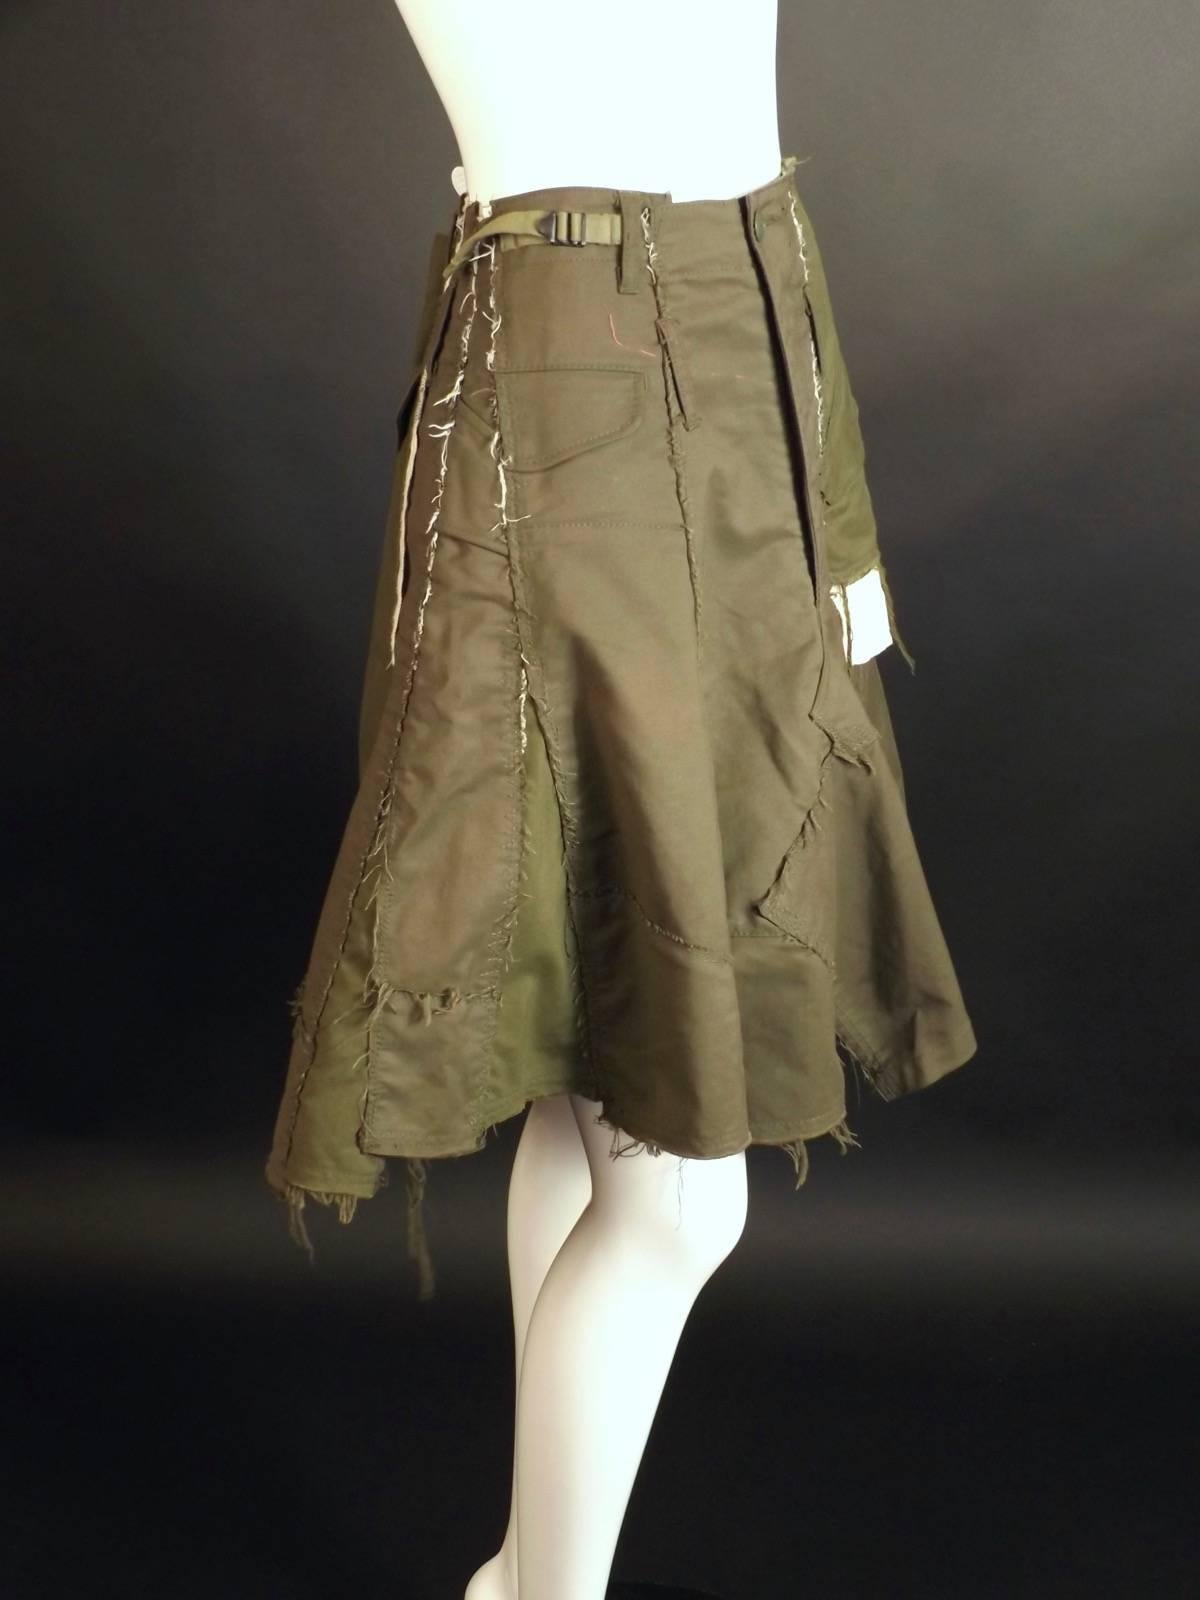 2006 Distressed Junya Watanabe Fatigue Skirt In Excellent Condition For Sale In Dallas, TX